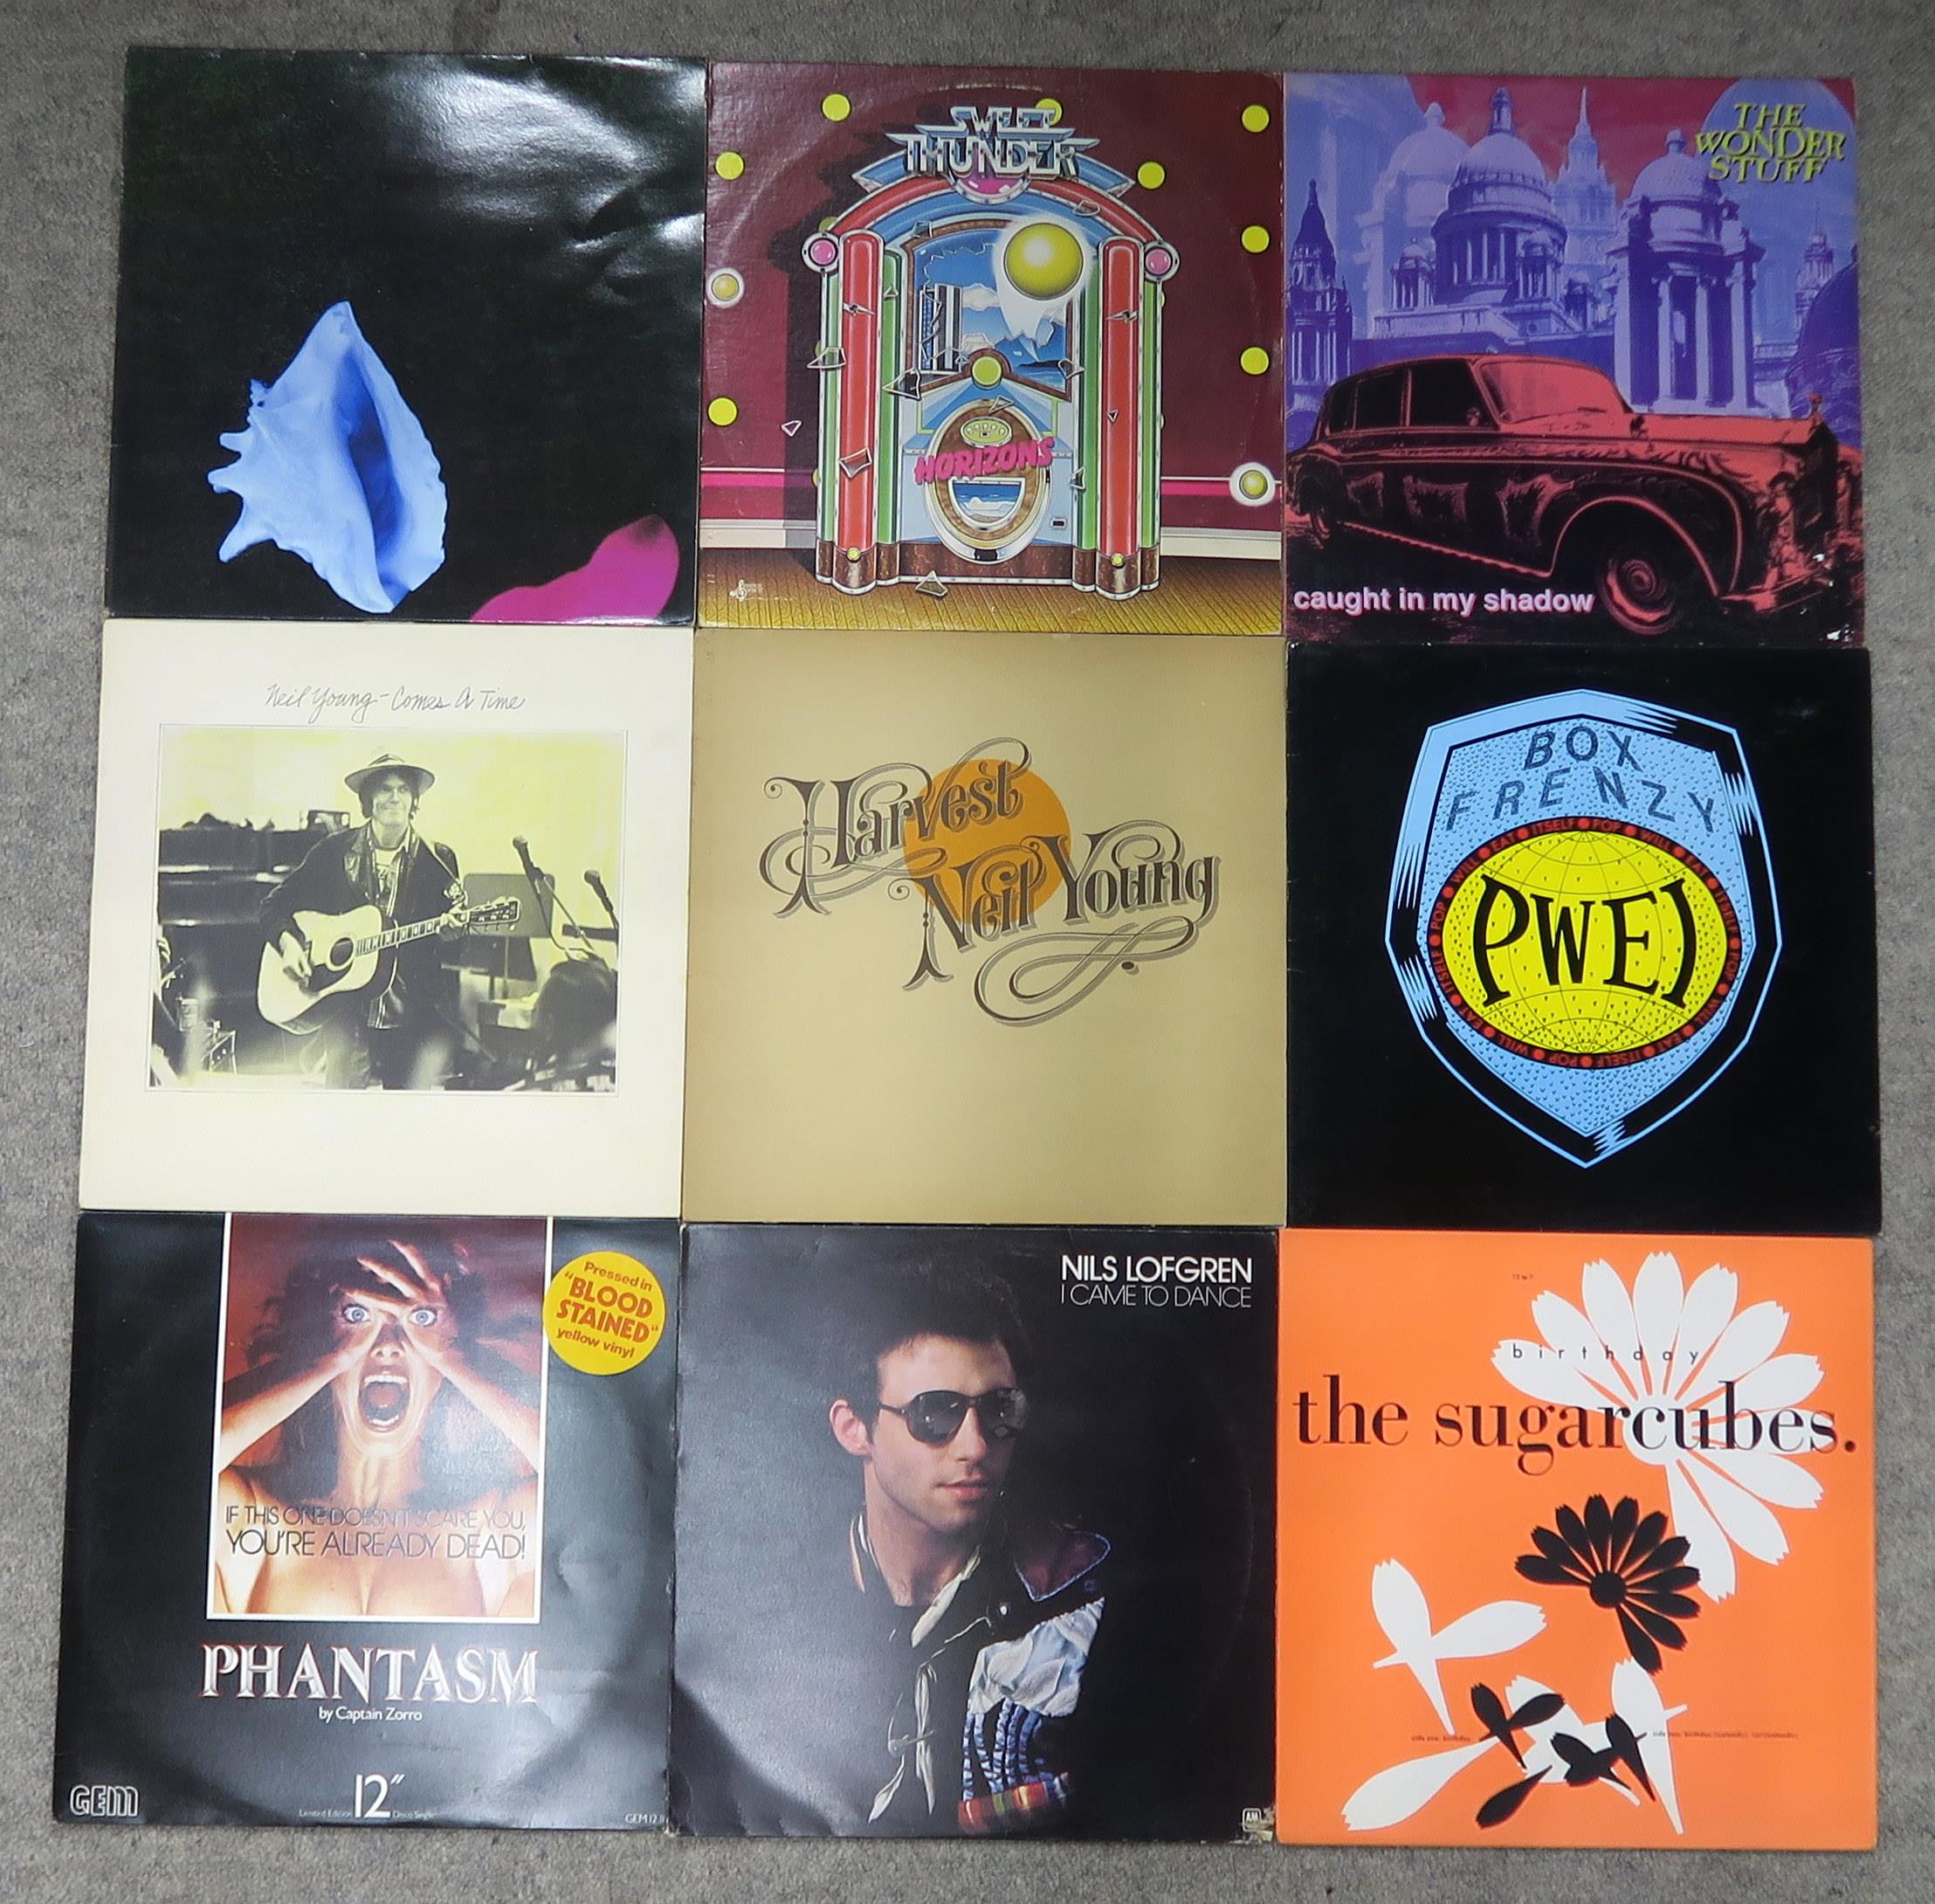 VINYL RECORDS a lot vinyl LP and EP 12" pop, rock, folk, country, soundtrack and spoken word with